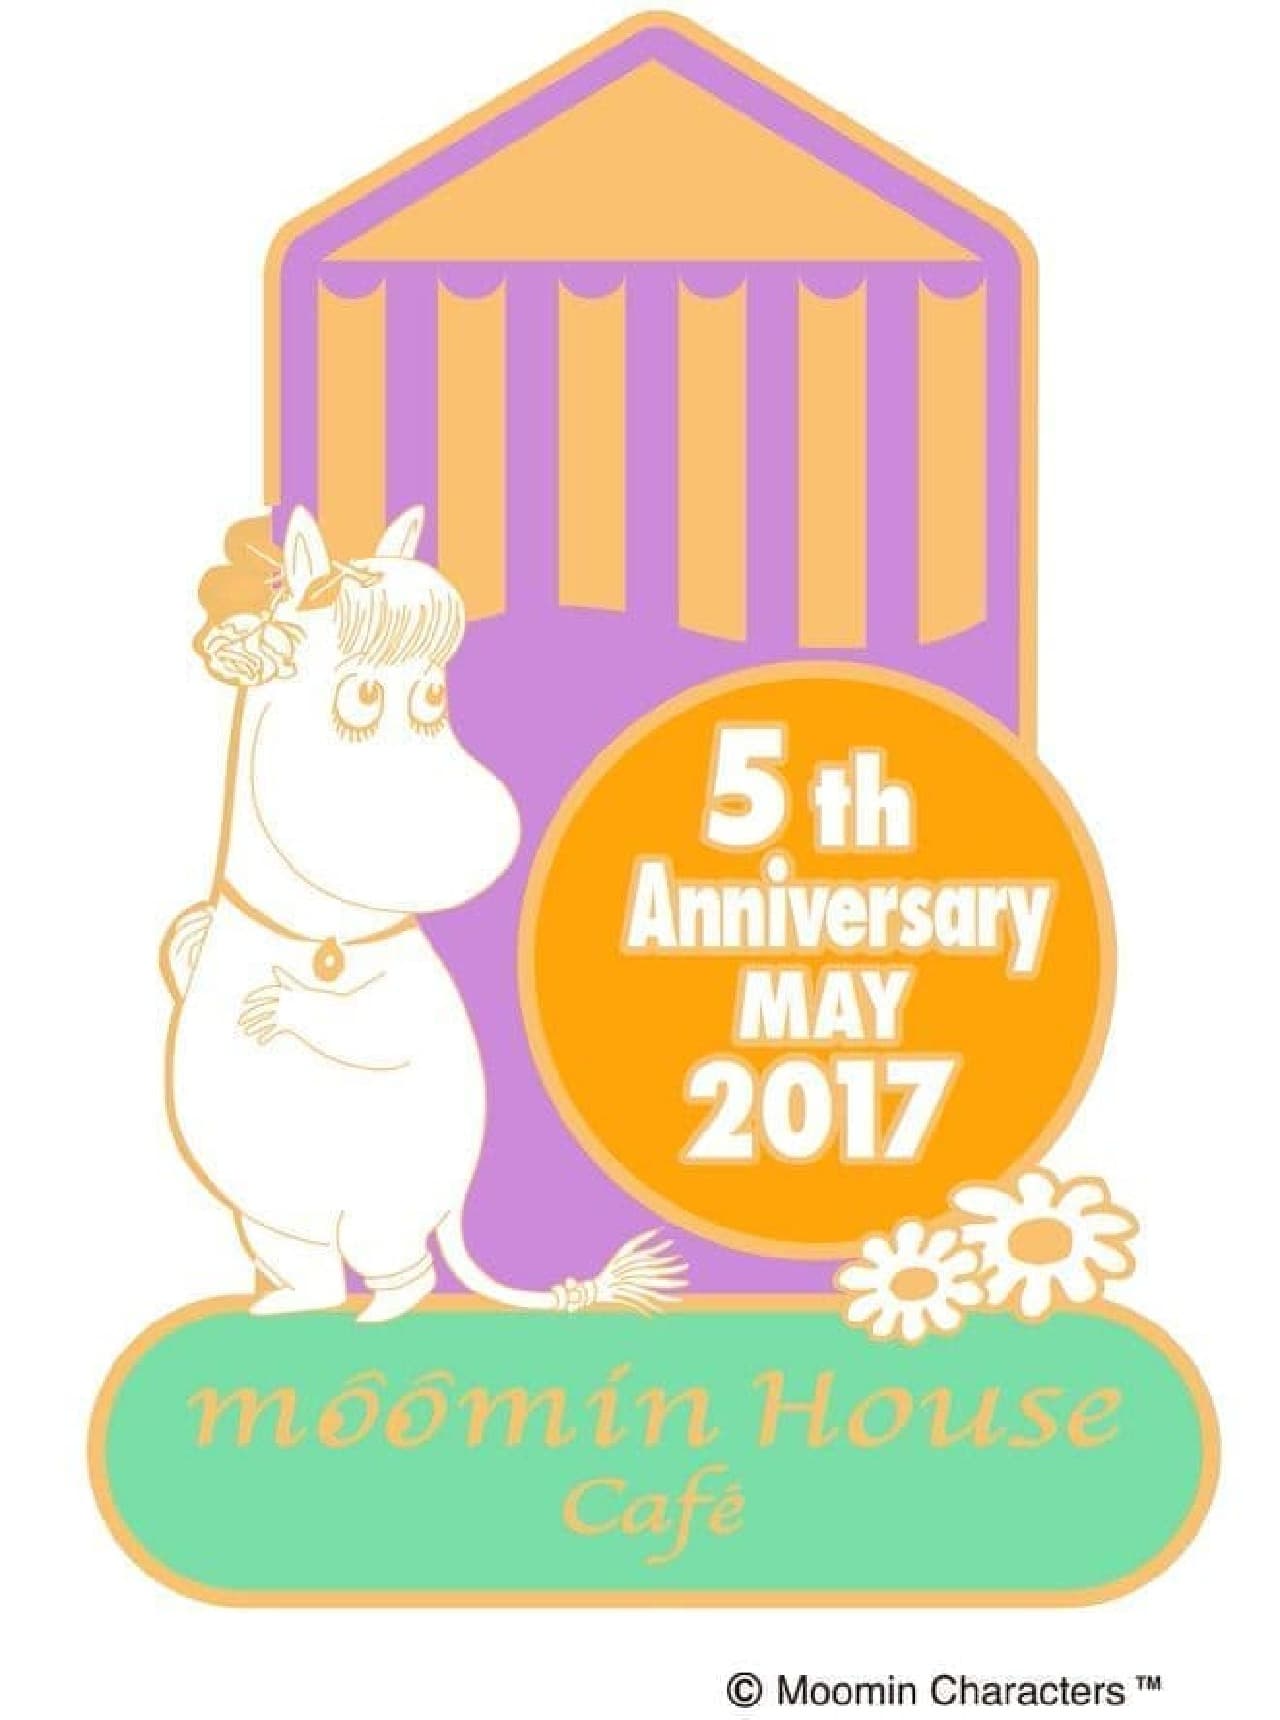 "Moomin House Cafe" is a cafe with the motif of the Finnish fairy tale "Moomin".